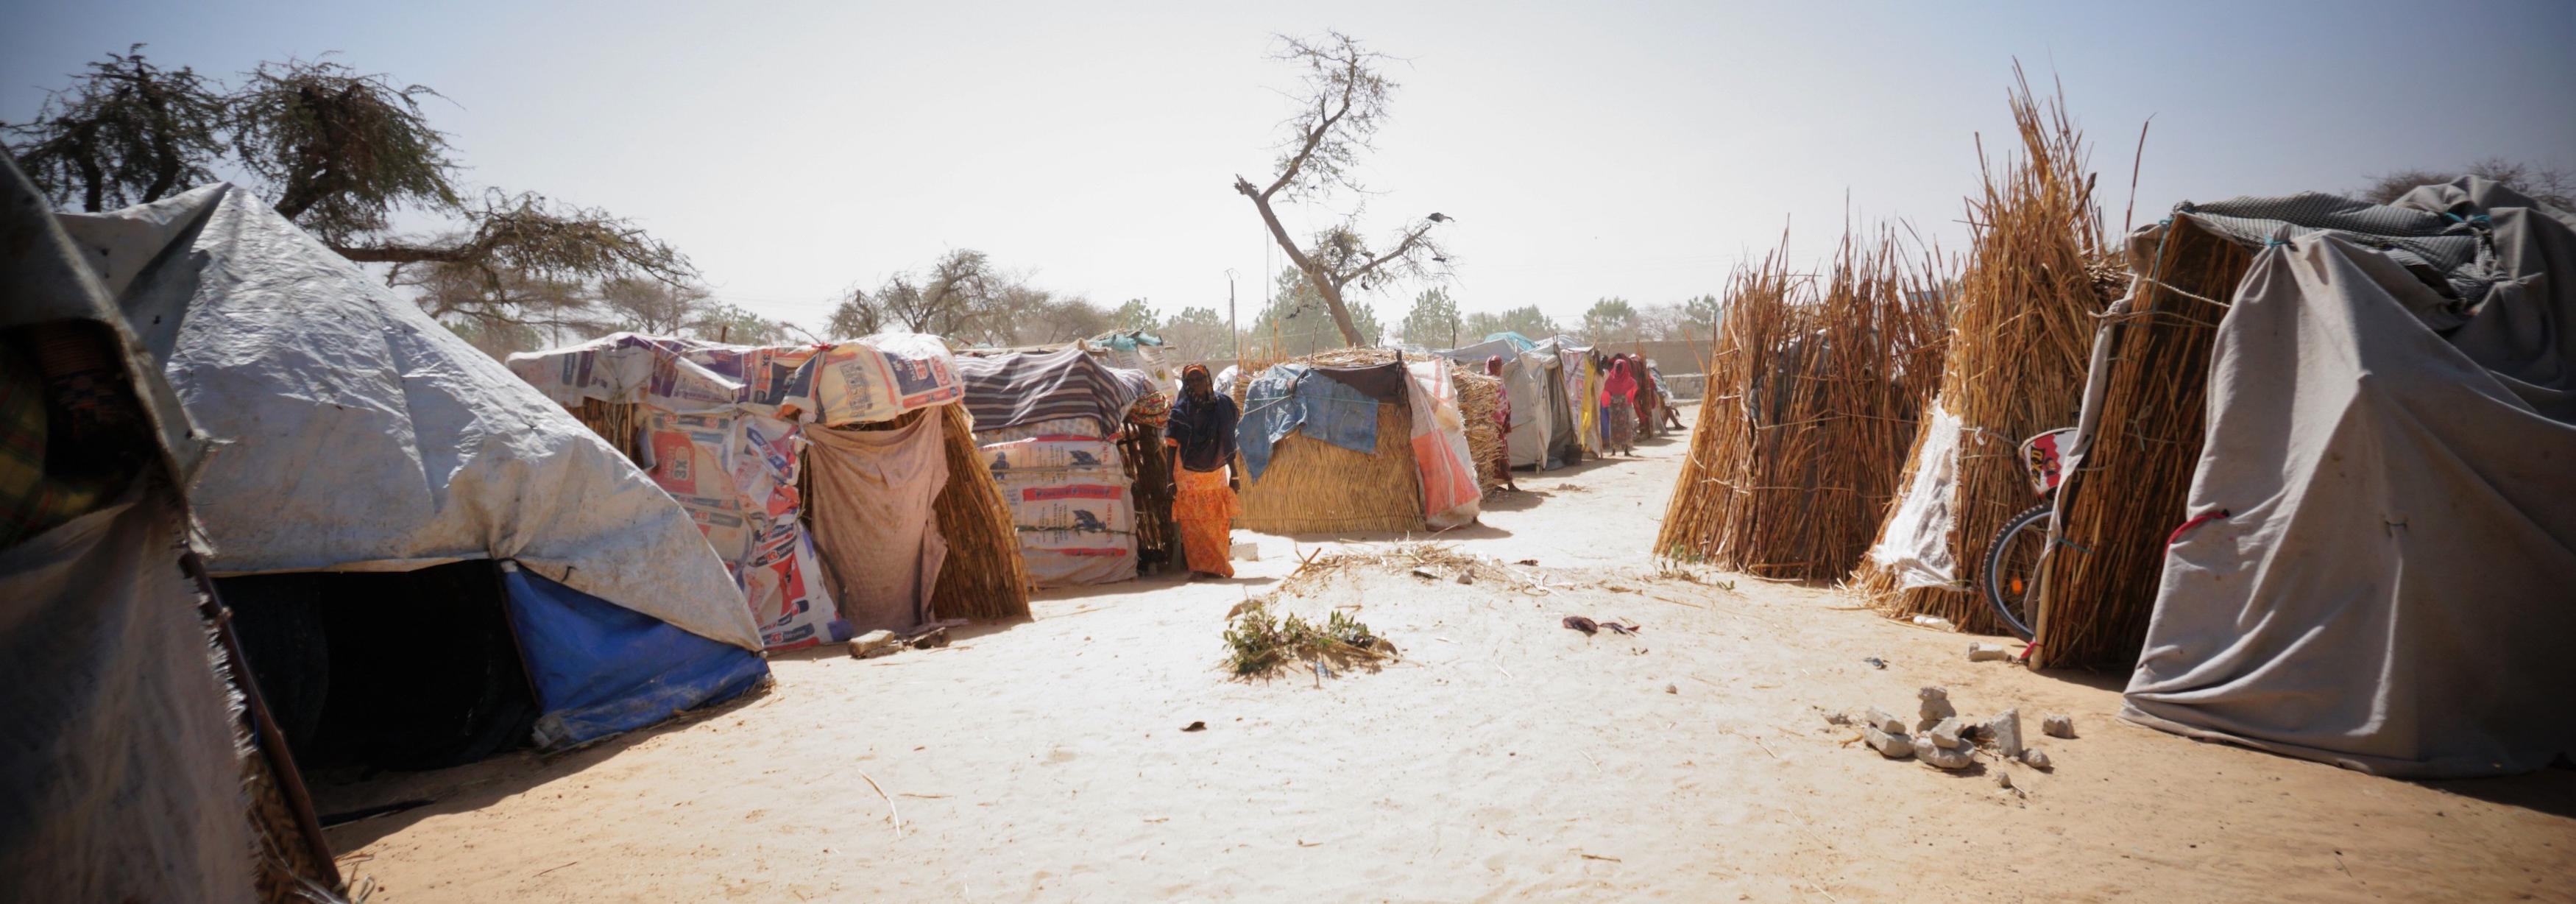 Makeshift shelters in IDP site